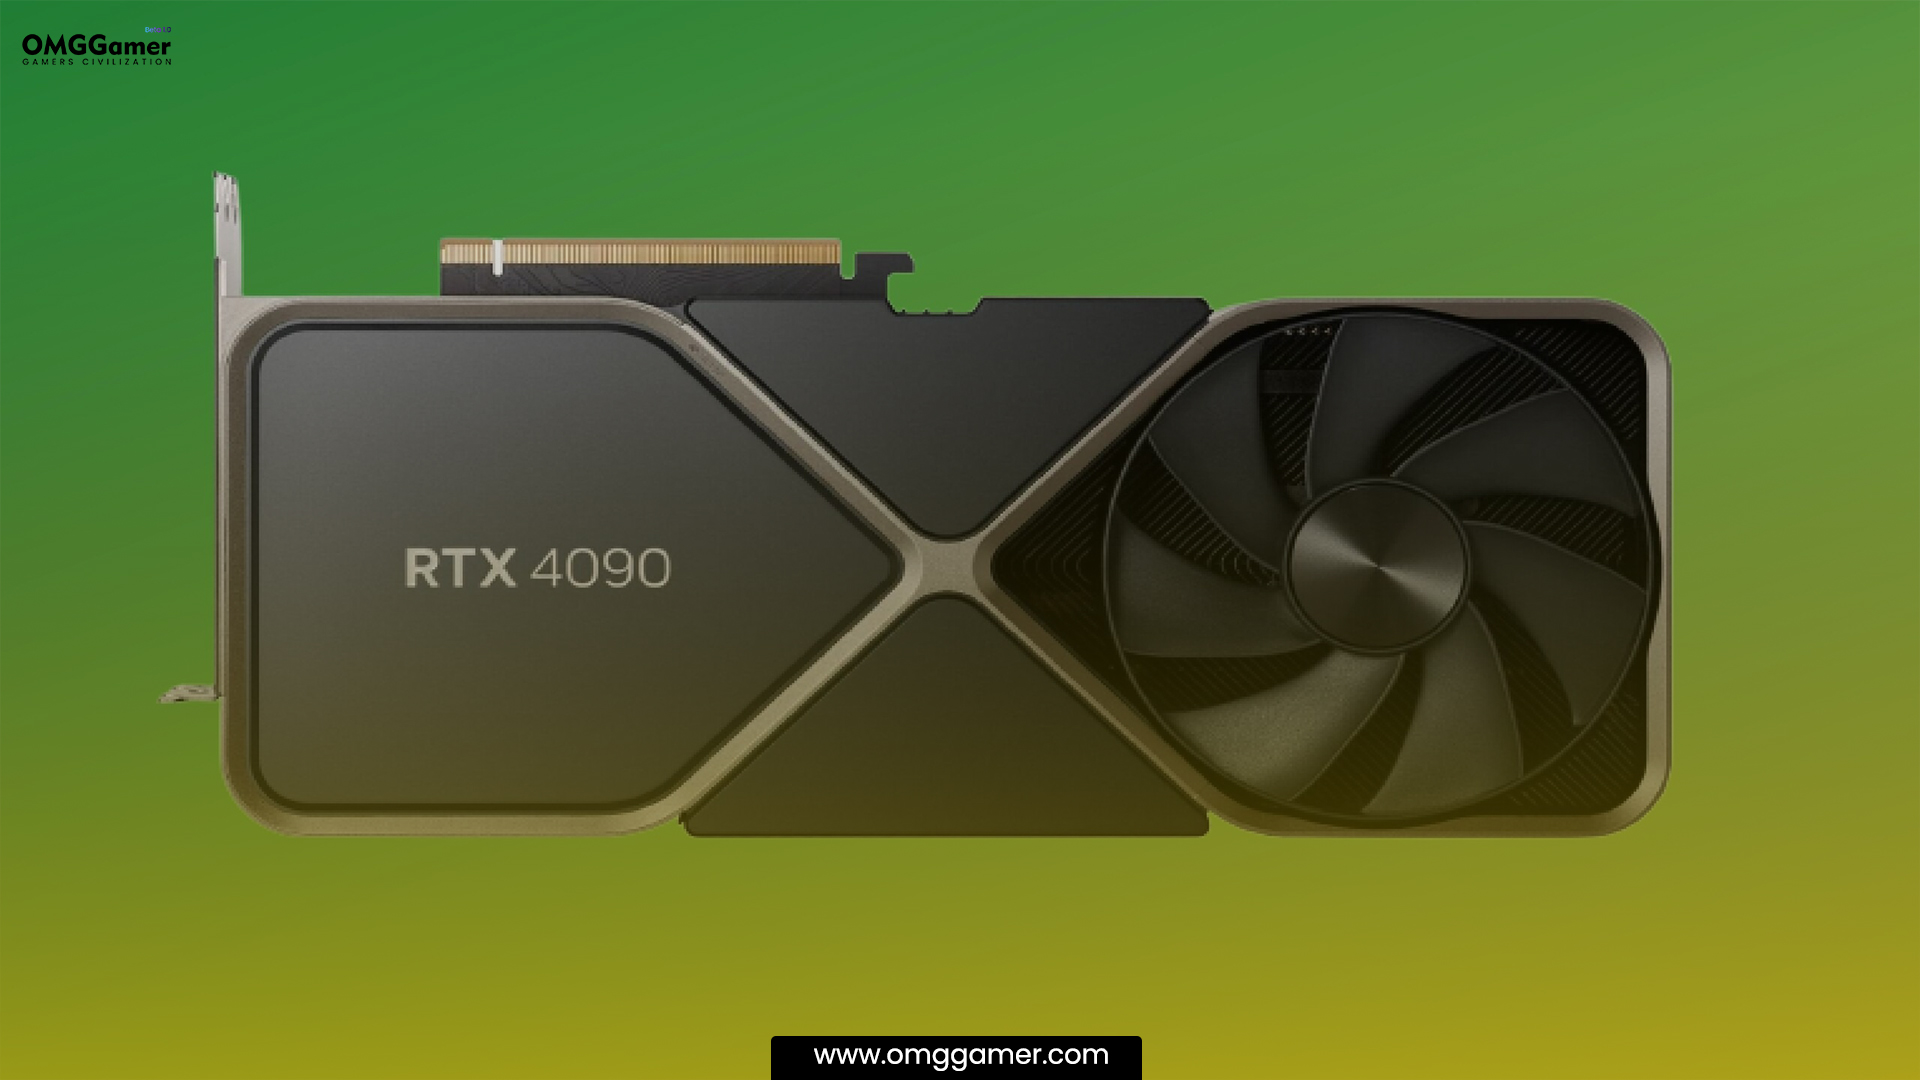 About Nvidia RTX 4090